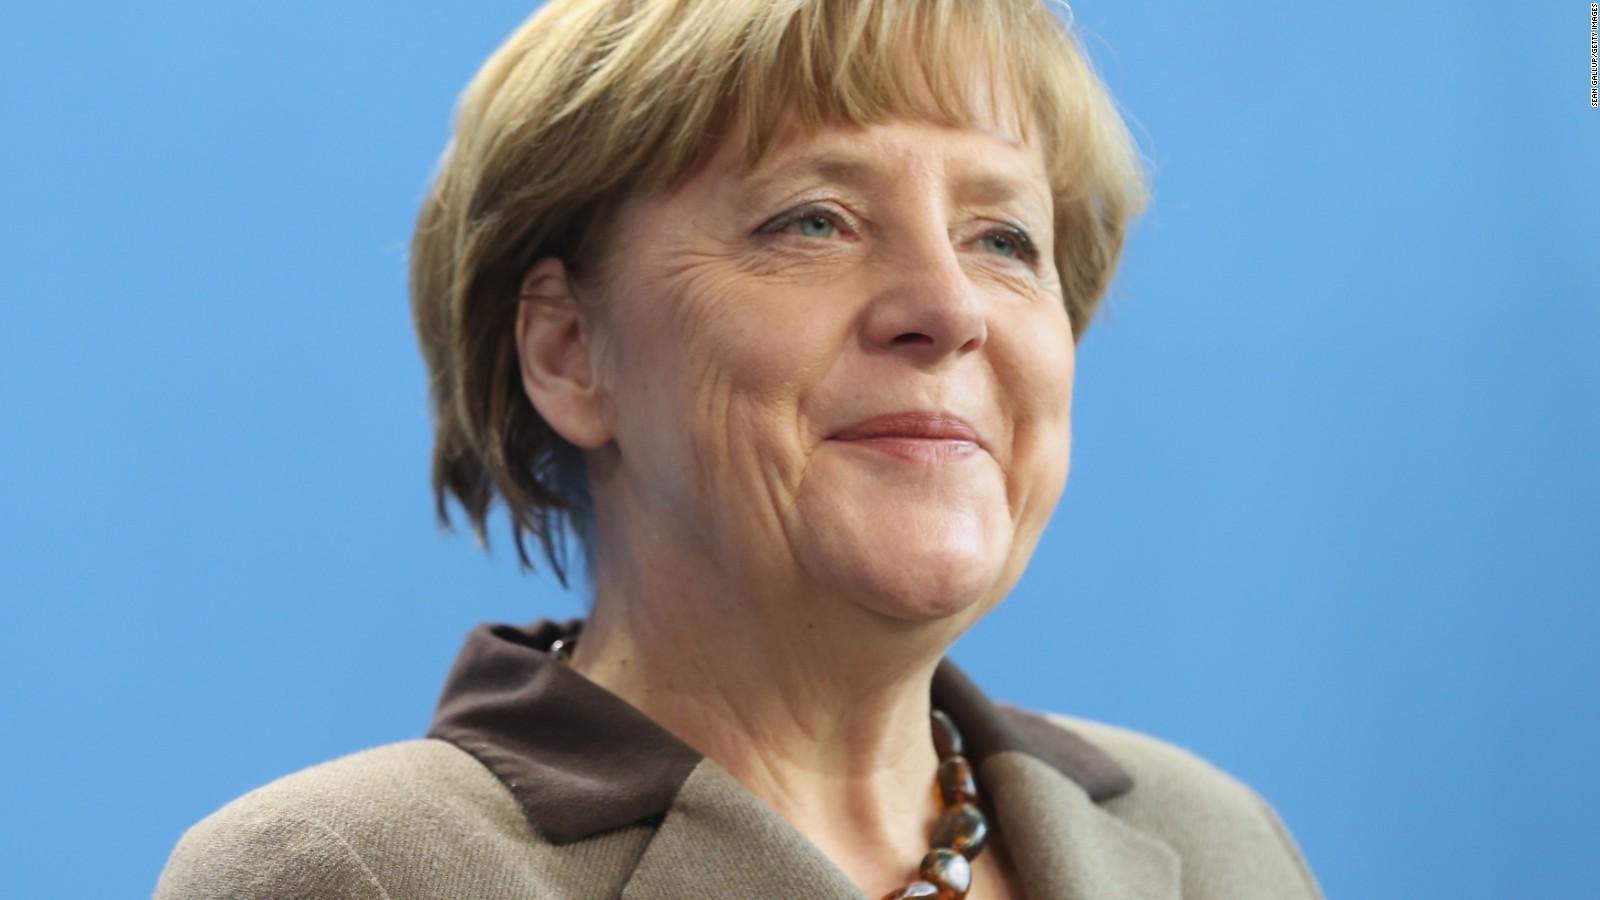 Germany's Angela Merkel Time's Person of the Year